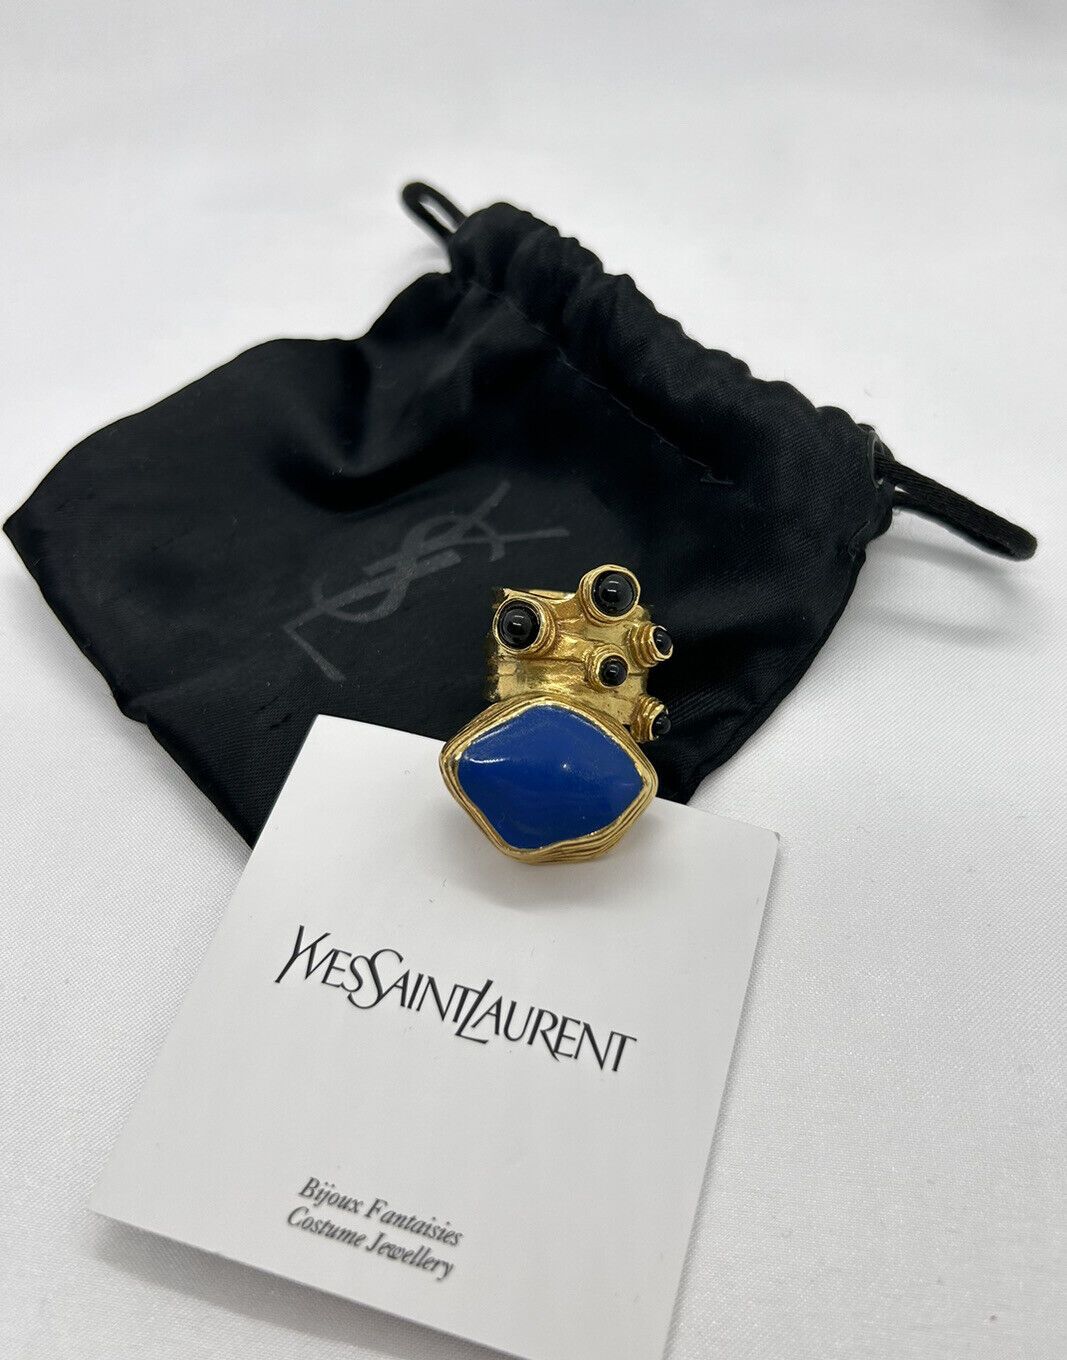 Y S L Saint Laurent Arty ring with blue enamel and black cabochons size 6 | eBay UK